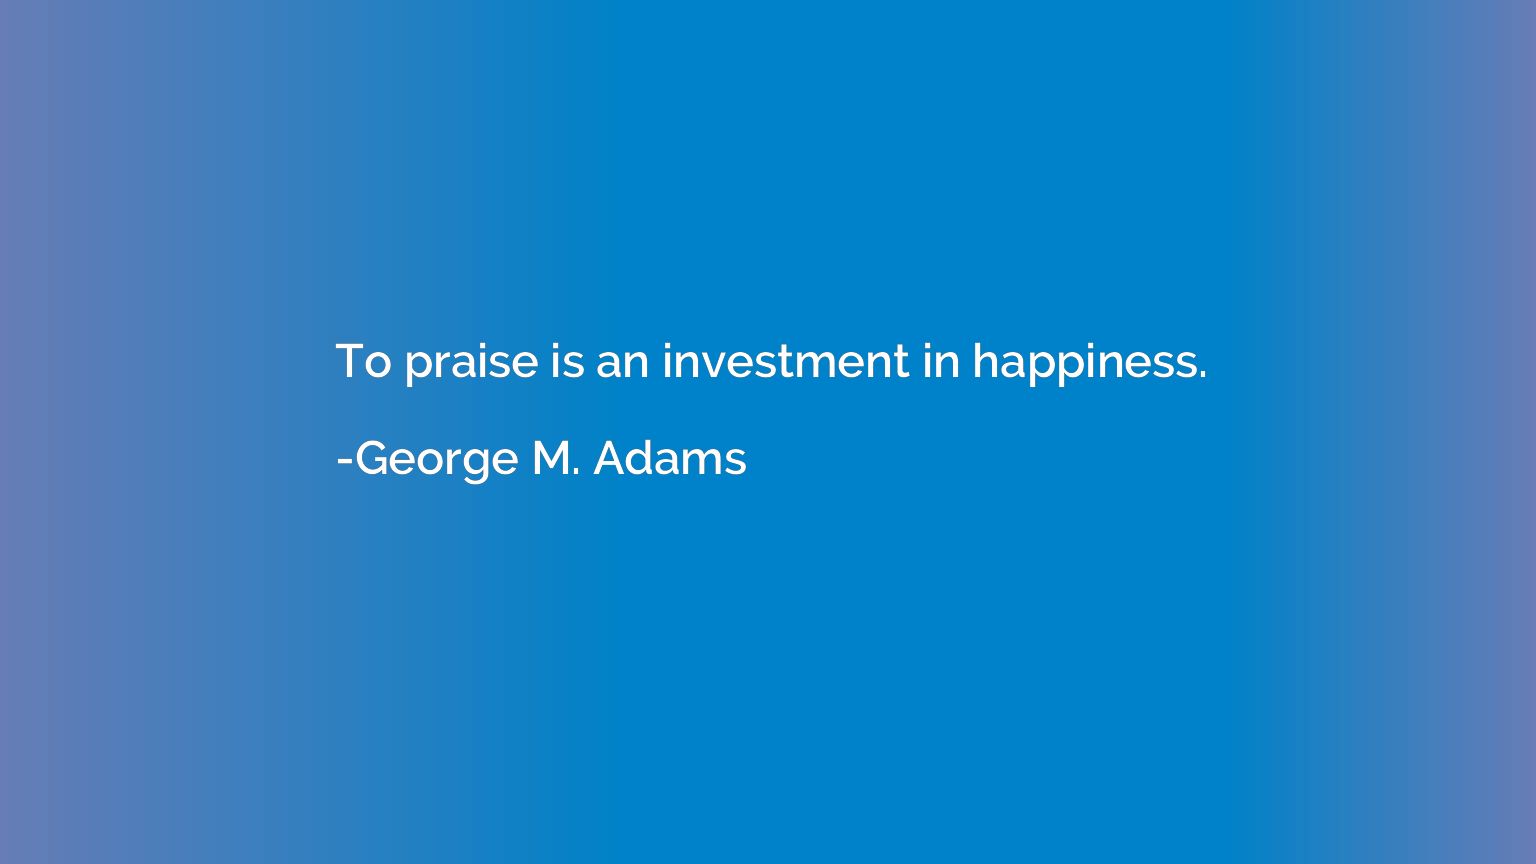 To praise is an investment in happiness.